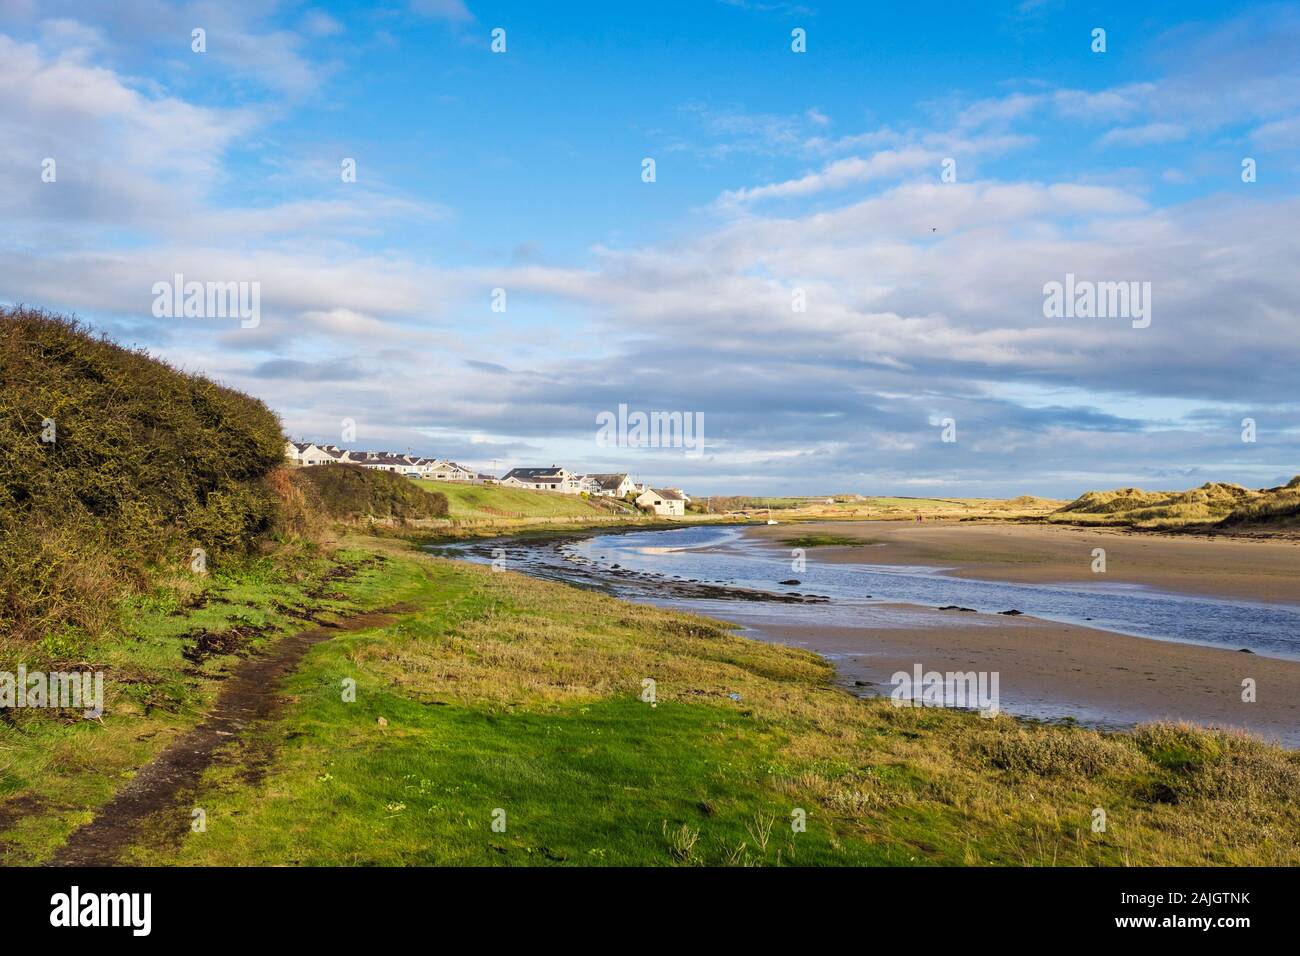 Looking inland along Isle of Anglesey coastal footpath beside Afon Ffraw river at low tide. Aberffraw, Anglesey, north Wales, UK, Britain, Europe Stock Photo